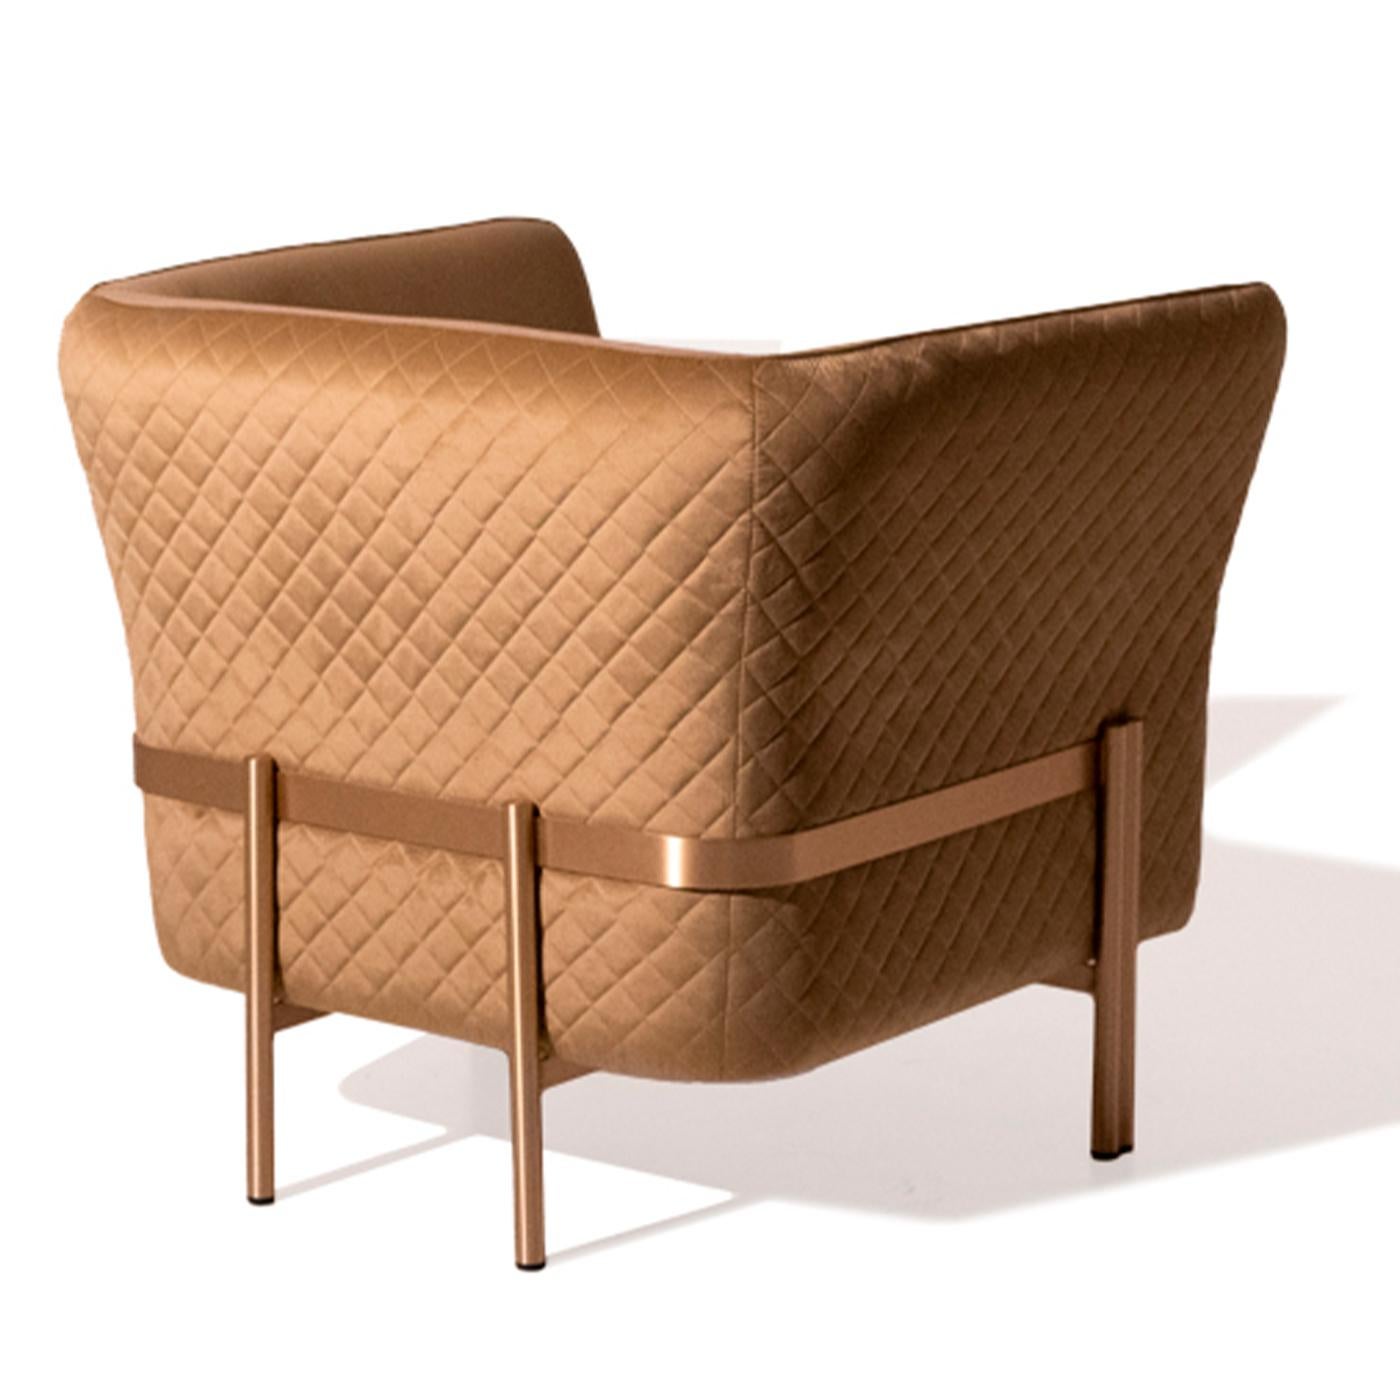 The Universal armchair is a modern style product that is very clean and light in shape. The base is made up of legs in solid satin brass that lifts and follows the curved line of the upholstered shell, on which the seat and back rest. Comfort is a